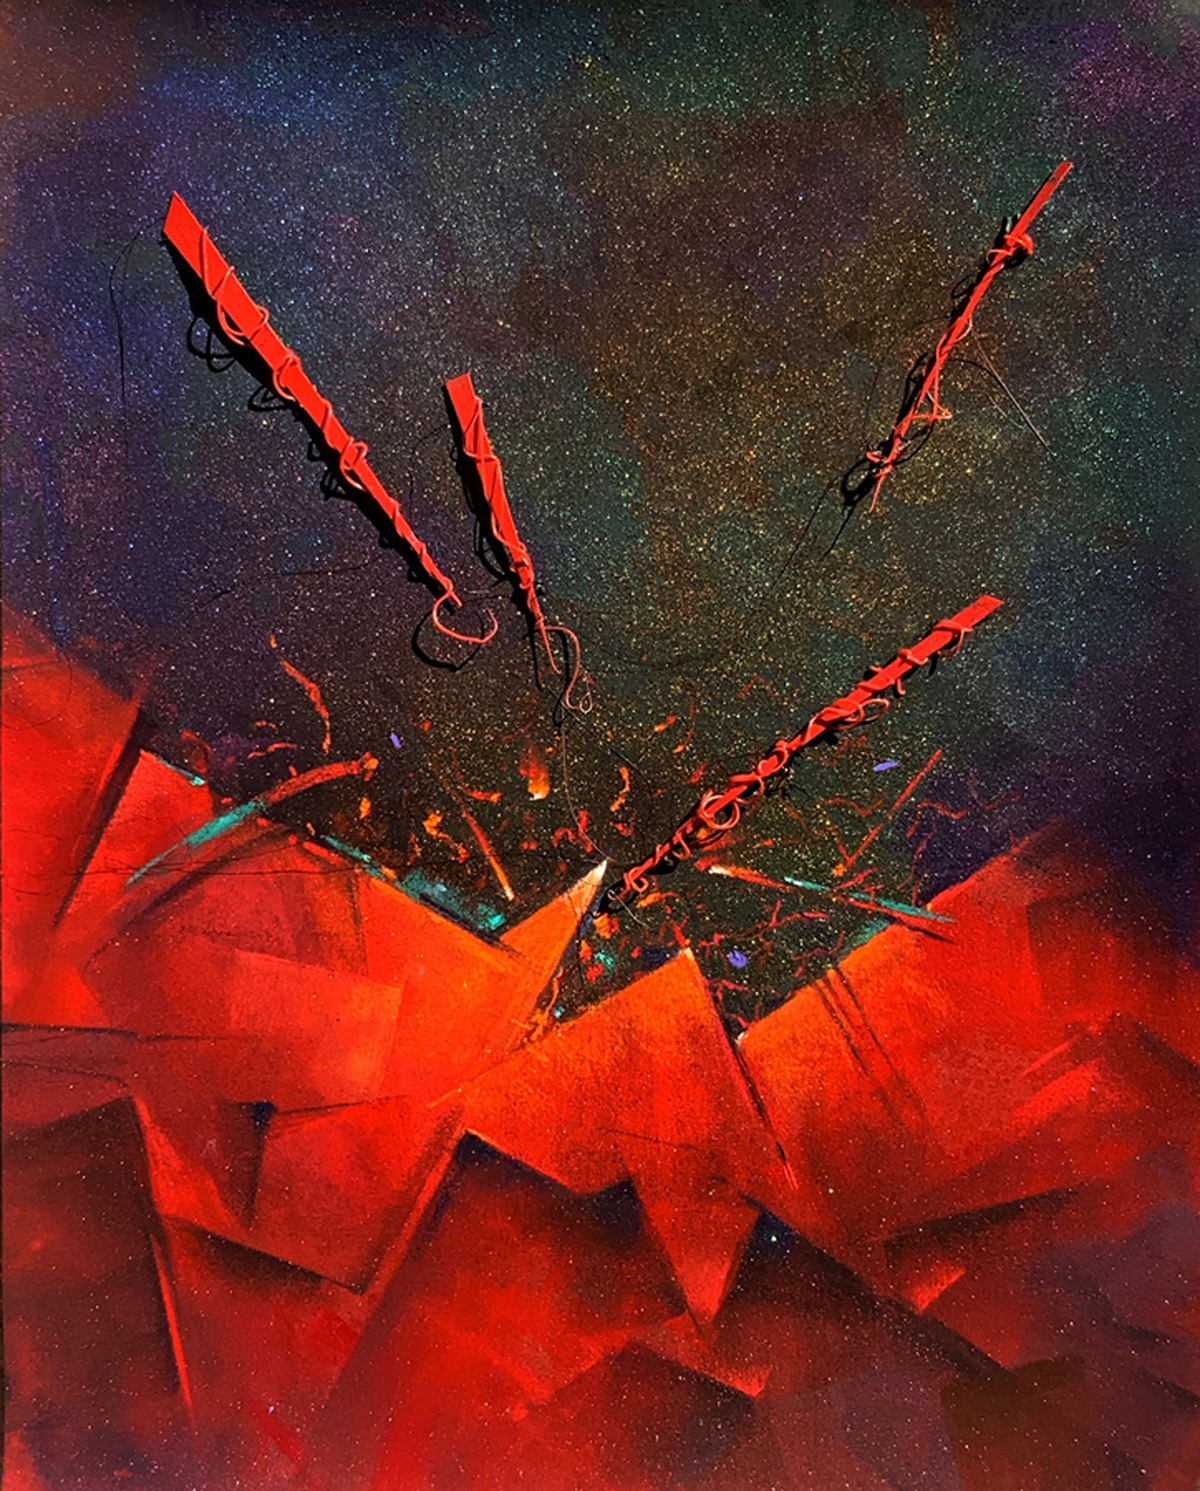 red pastel; dark background; abstract objects breaking 